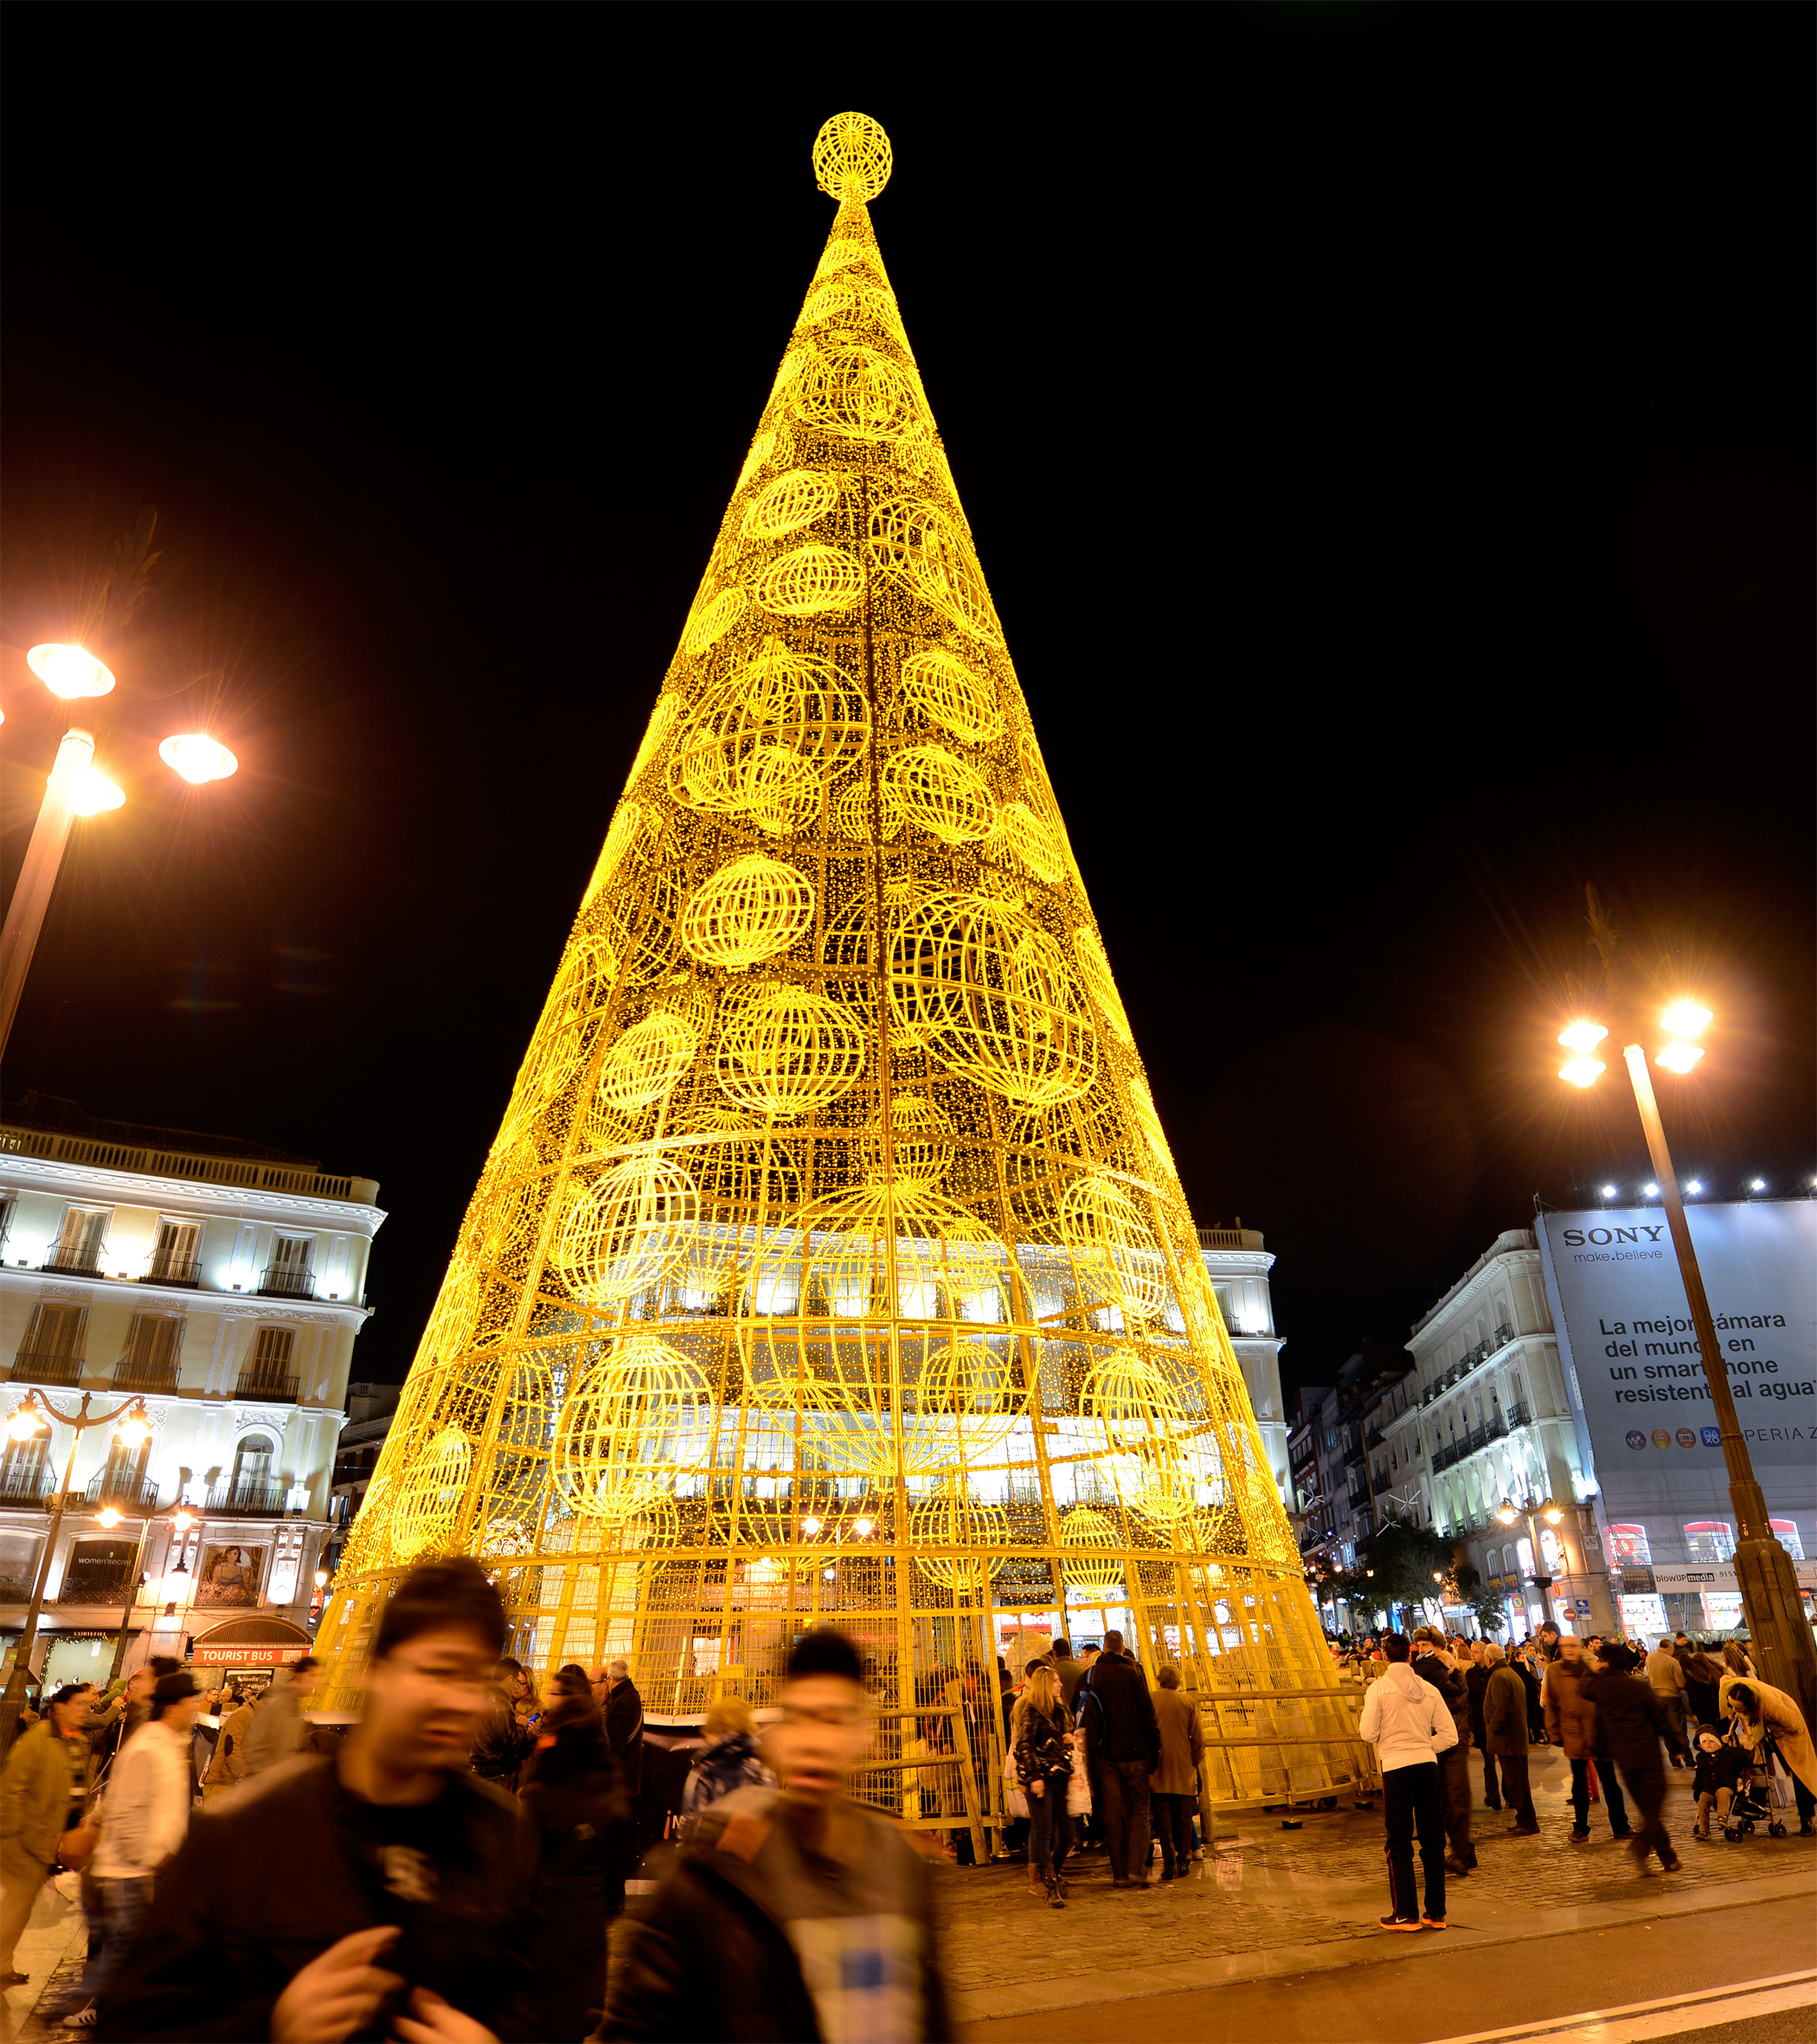 A giant Christmas tree illuminates the Puerta del Sol in the centre of Madrid.